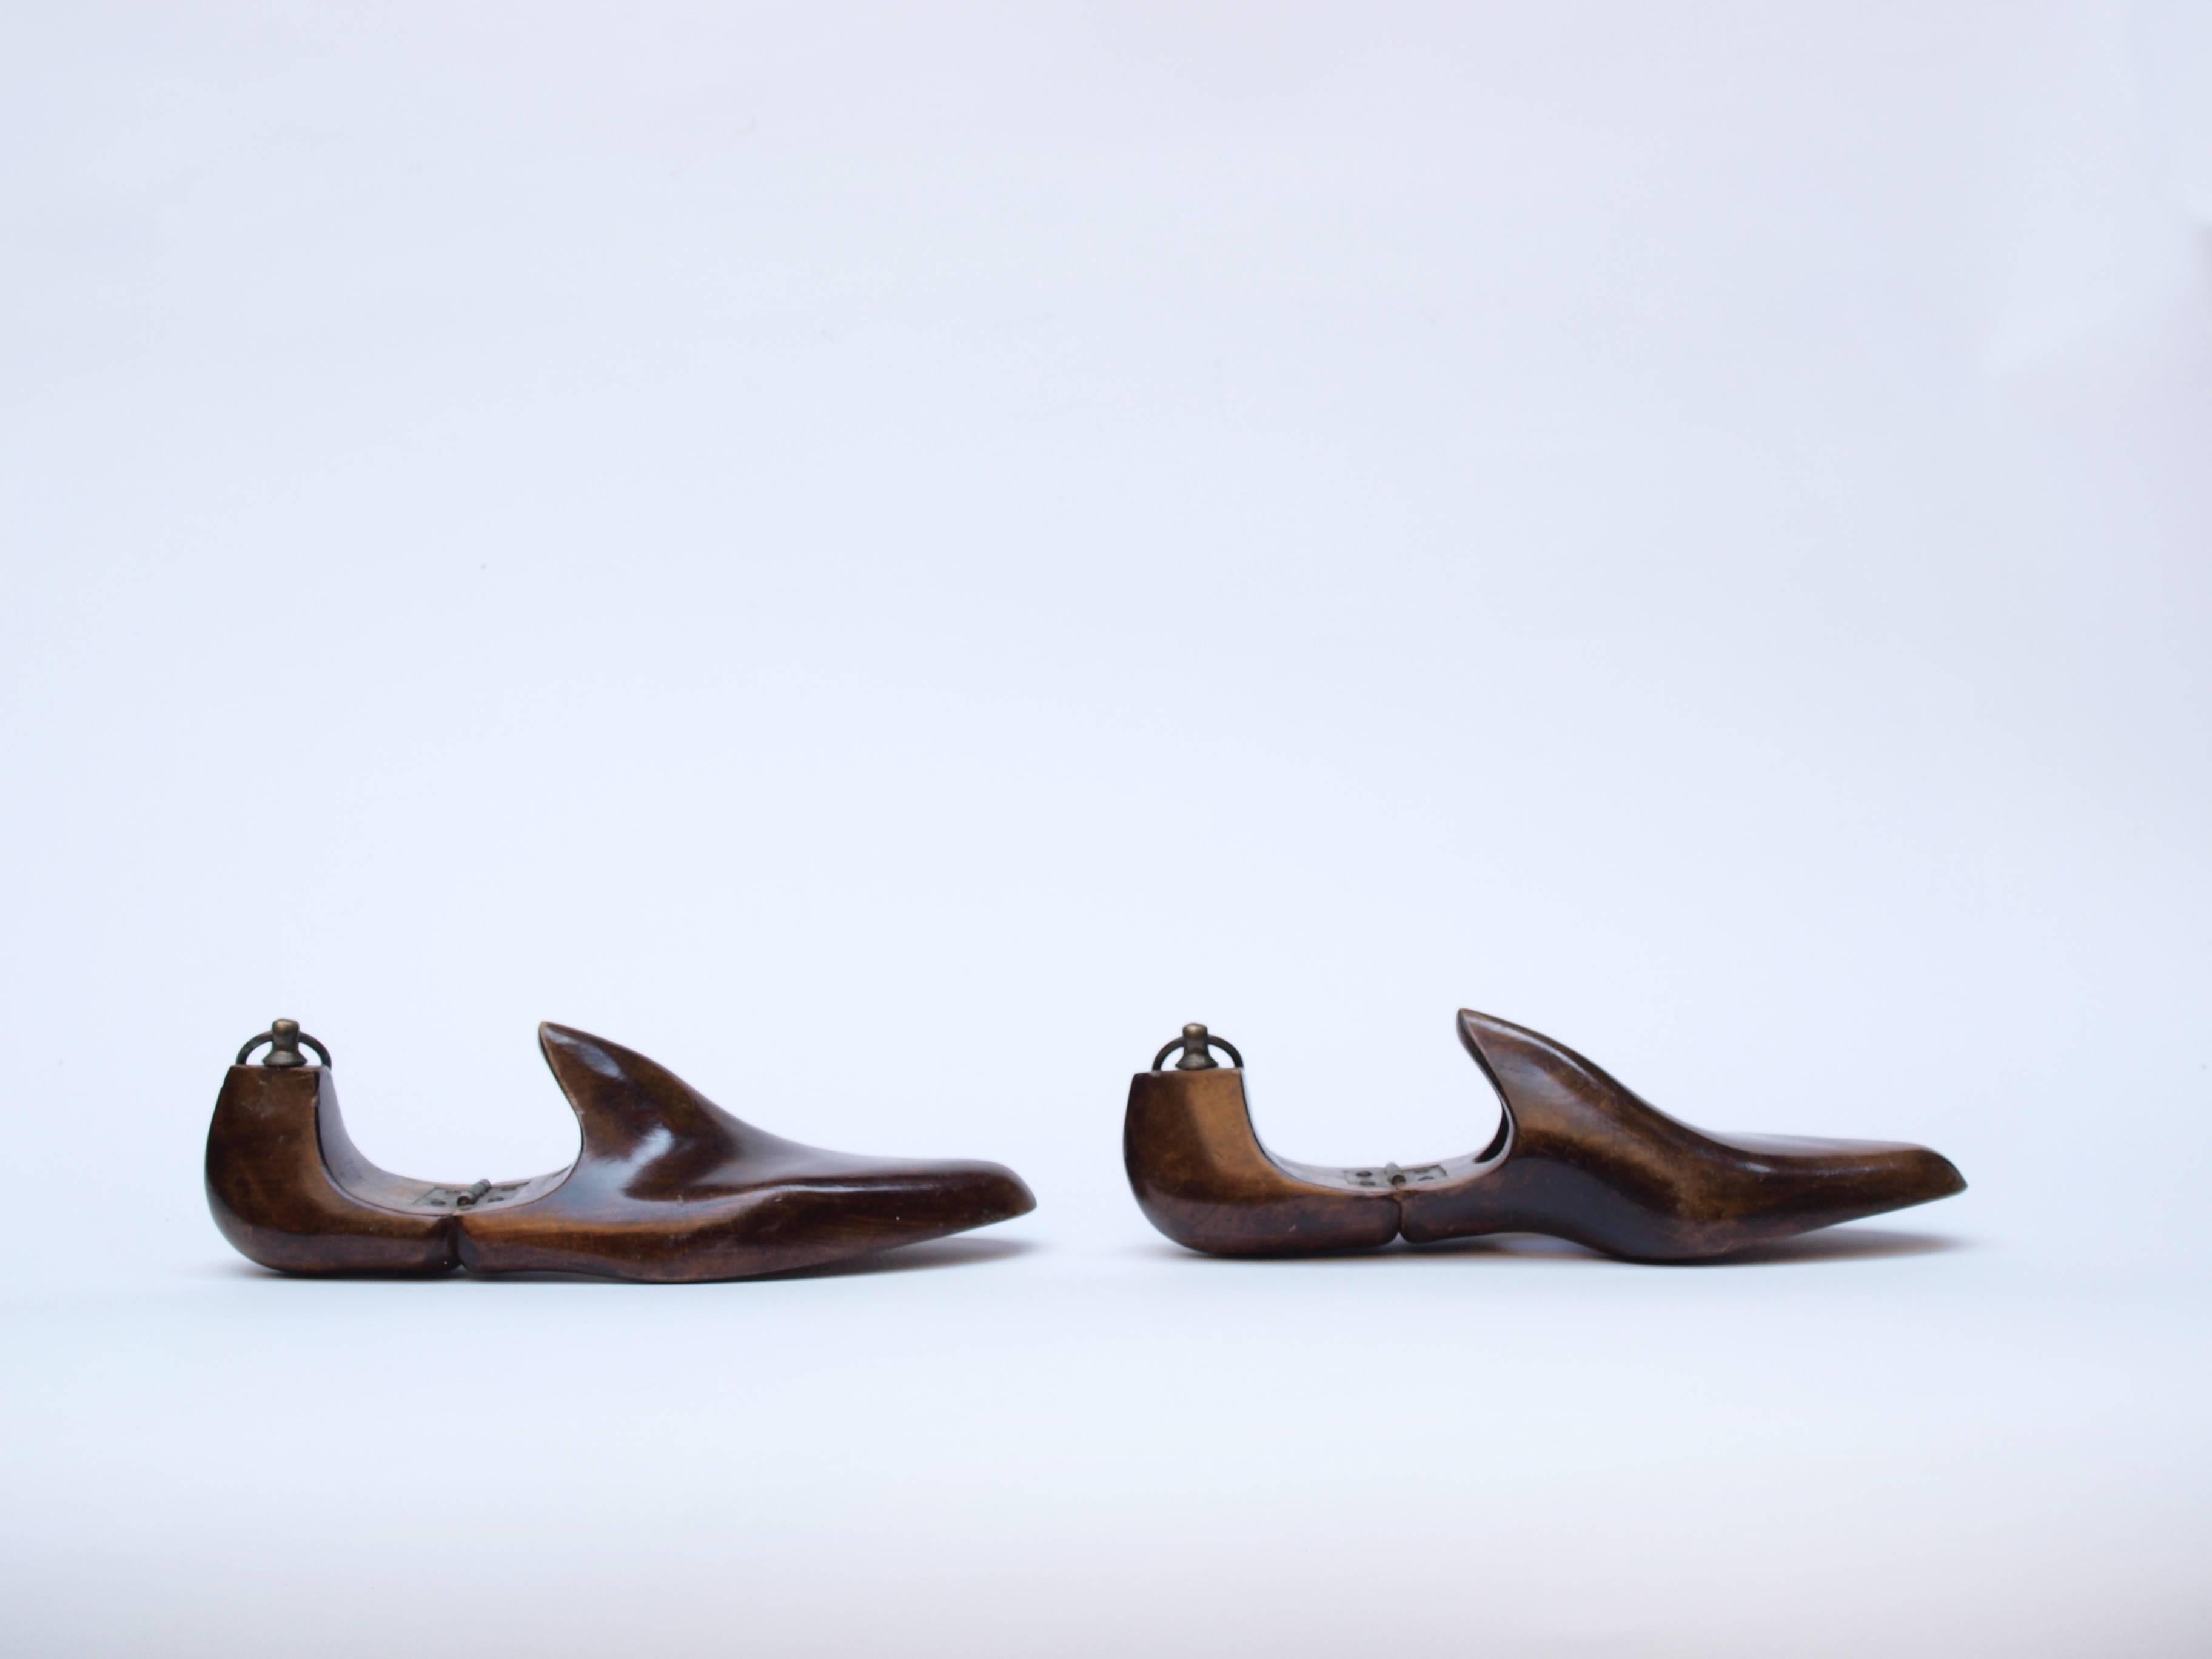 A pair of shoe trees from the 1930s in excellent condition and highly decorative.